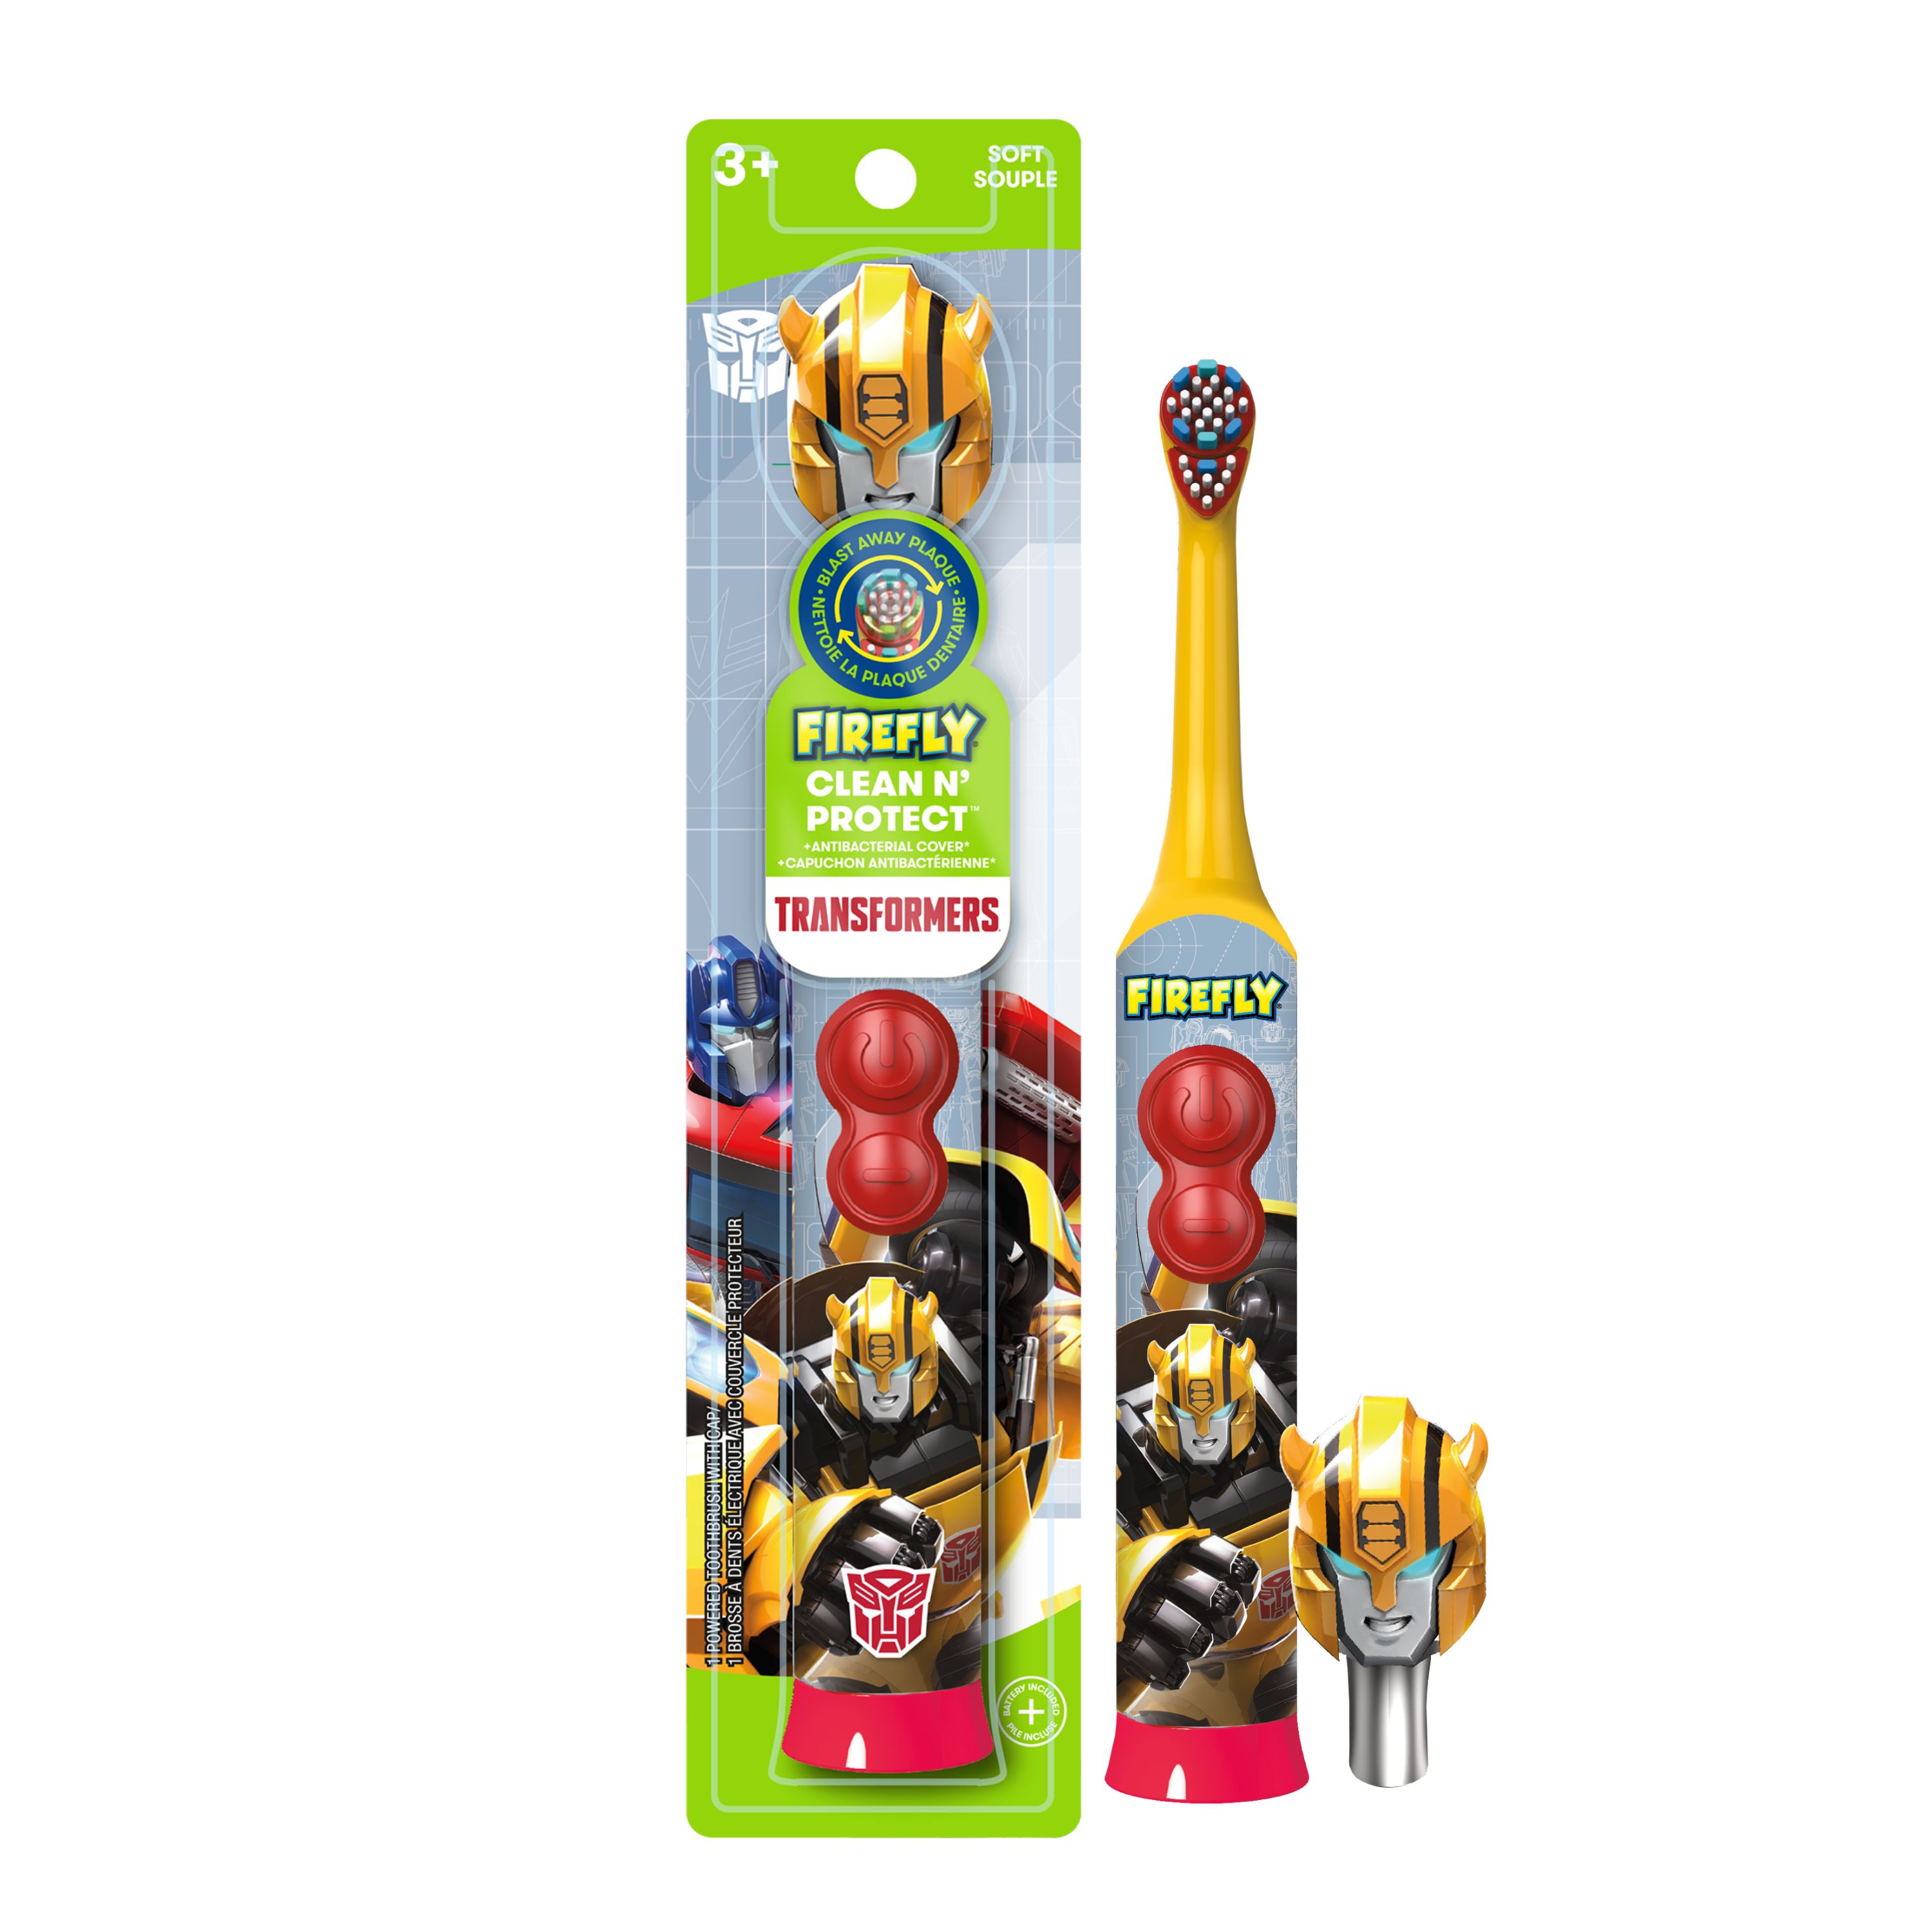 Firefly Clean N' Protect, Transformers Toothbrush with Fun 3D Antibacterial Character Cover, Soft Compact Brush Head, Ergonomic Handles for Small Hands, Battery Included, Ages 3+, 1 Count - image 1 of 8